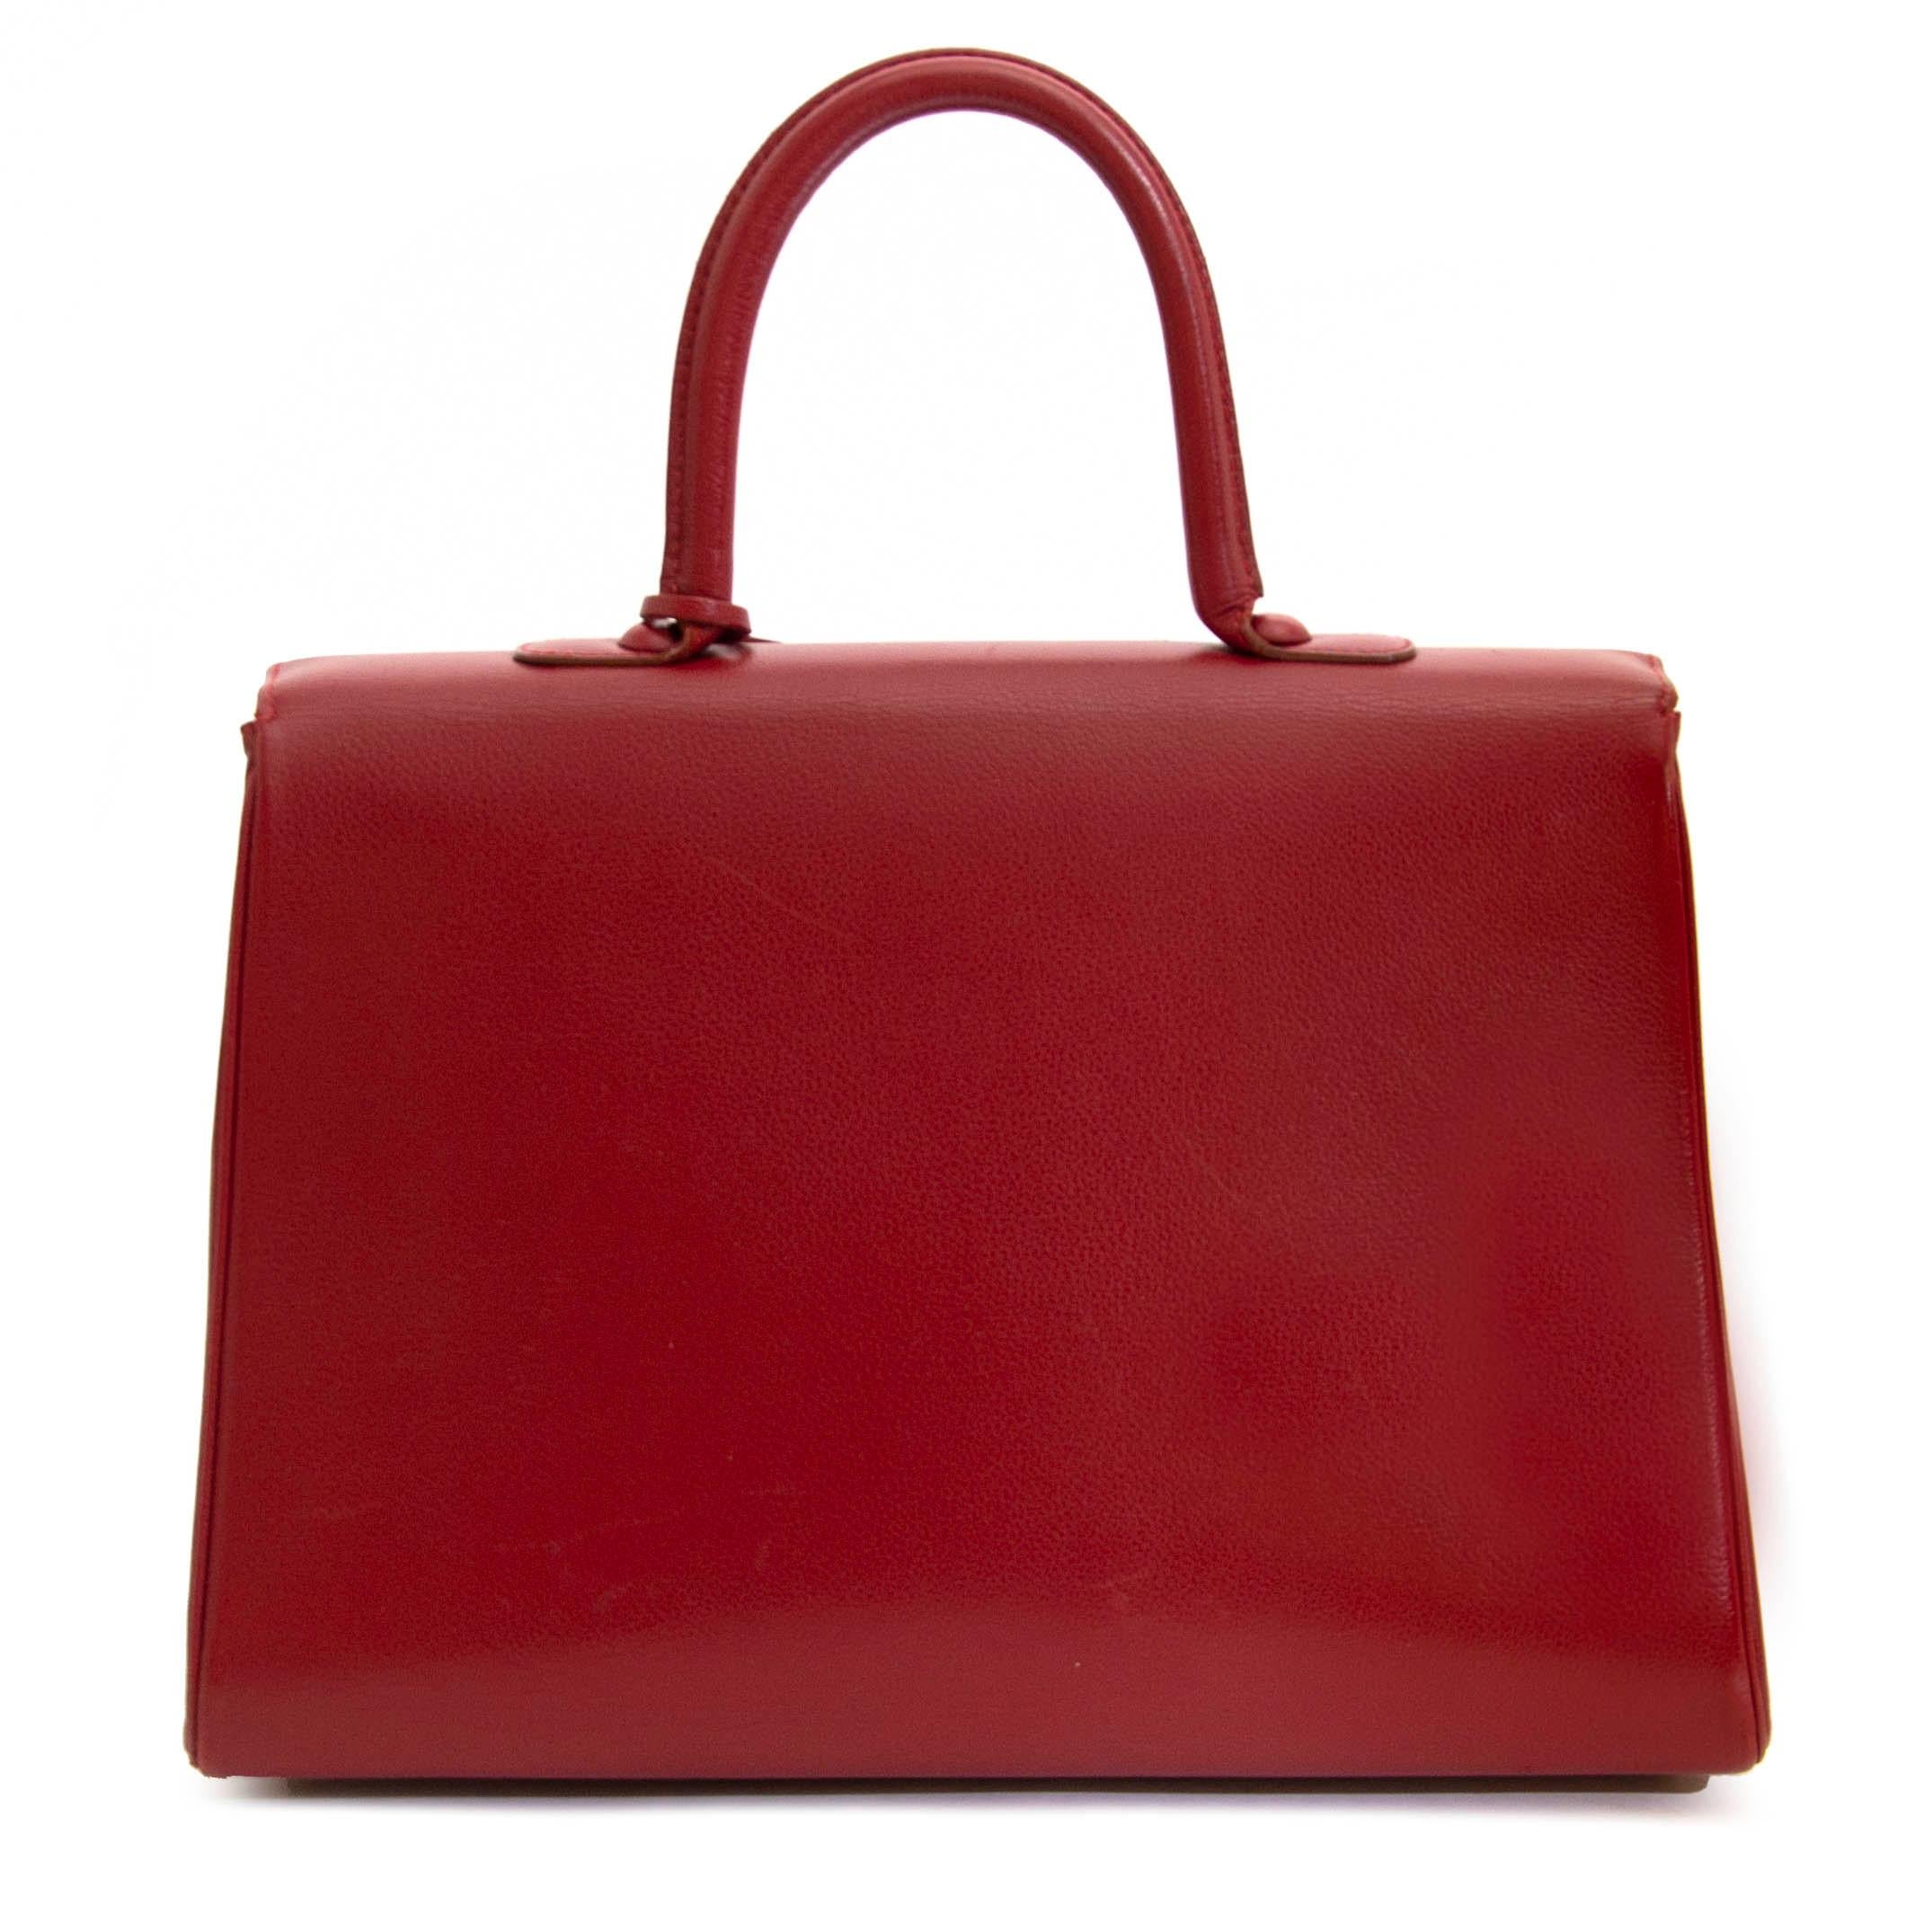 Very Good Preloved Condition

Delvaux Red Brillant GM

This Delvaux Brillant GM is a true beauty. The beautiful red leather makes the golden hardware pop! This is the perfect bag for daily use, enough space to store all your essentials!
The interior